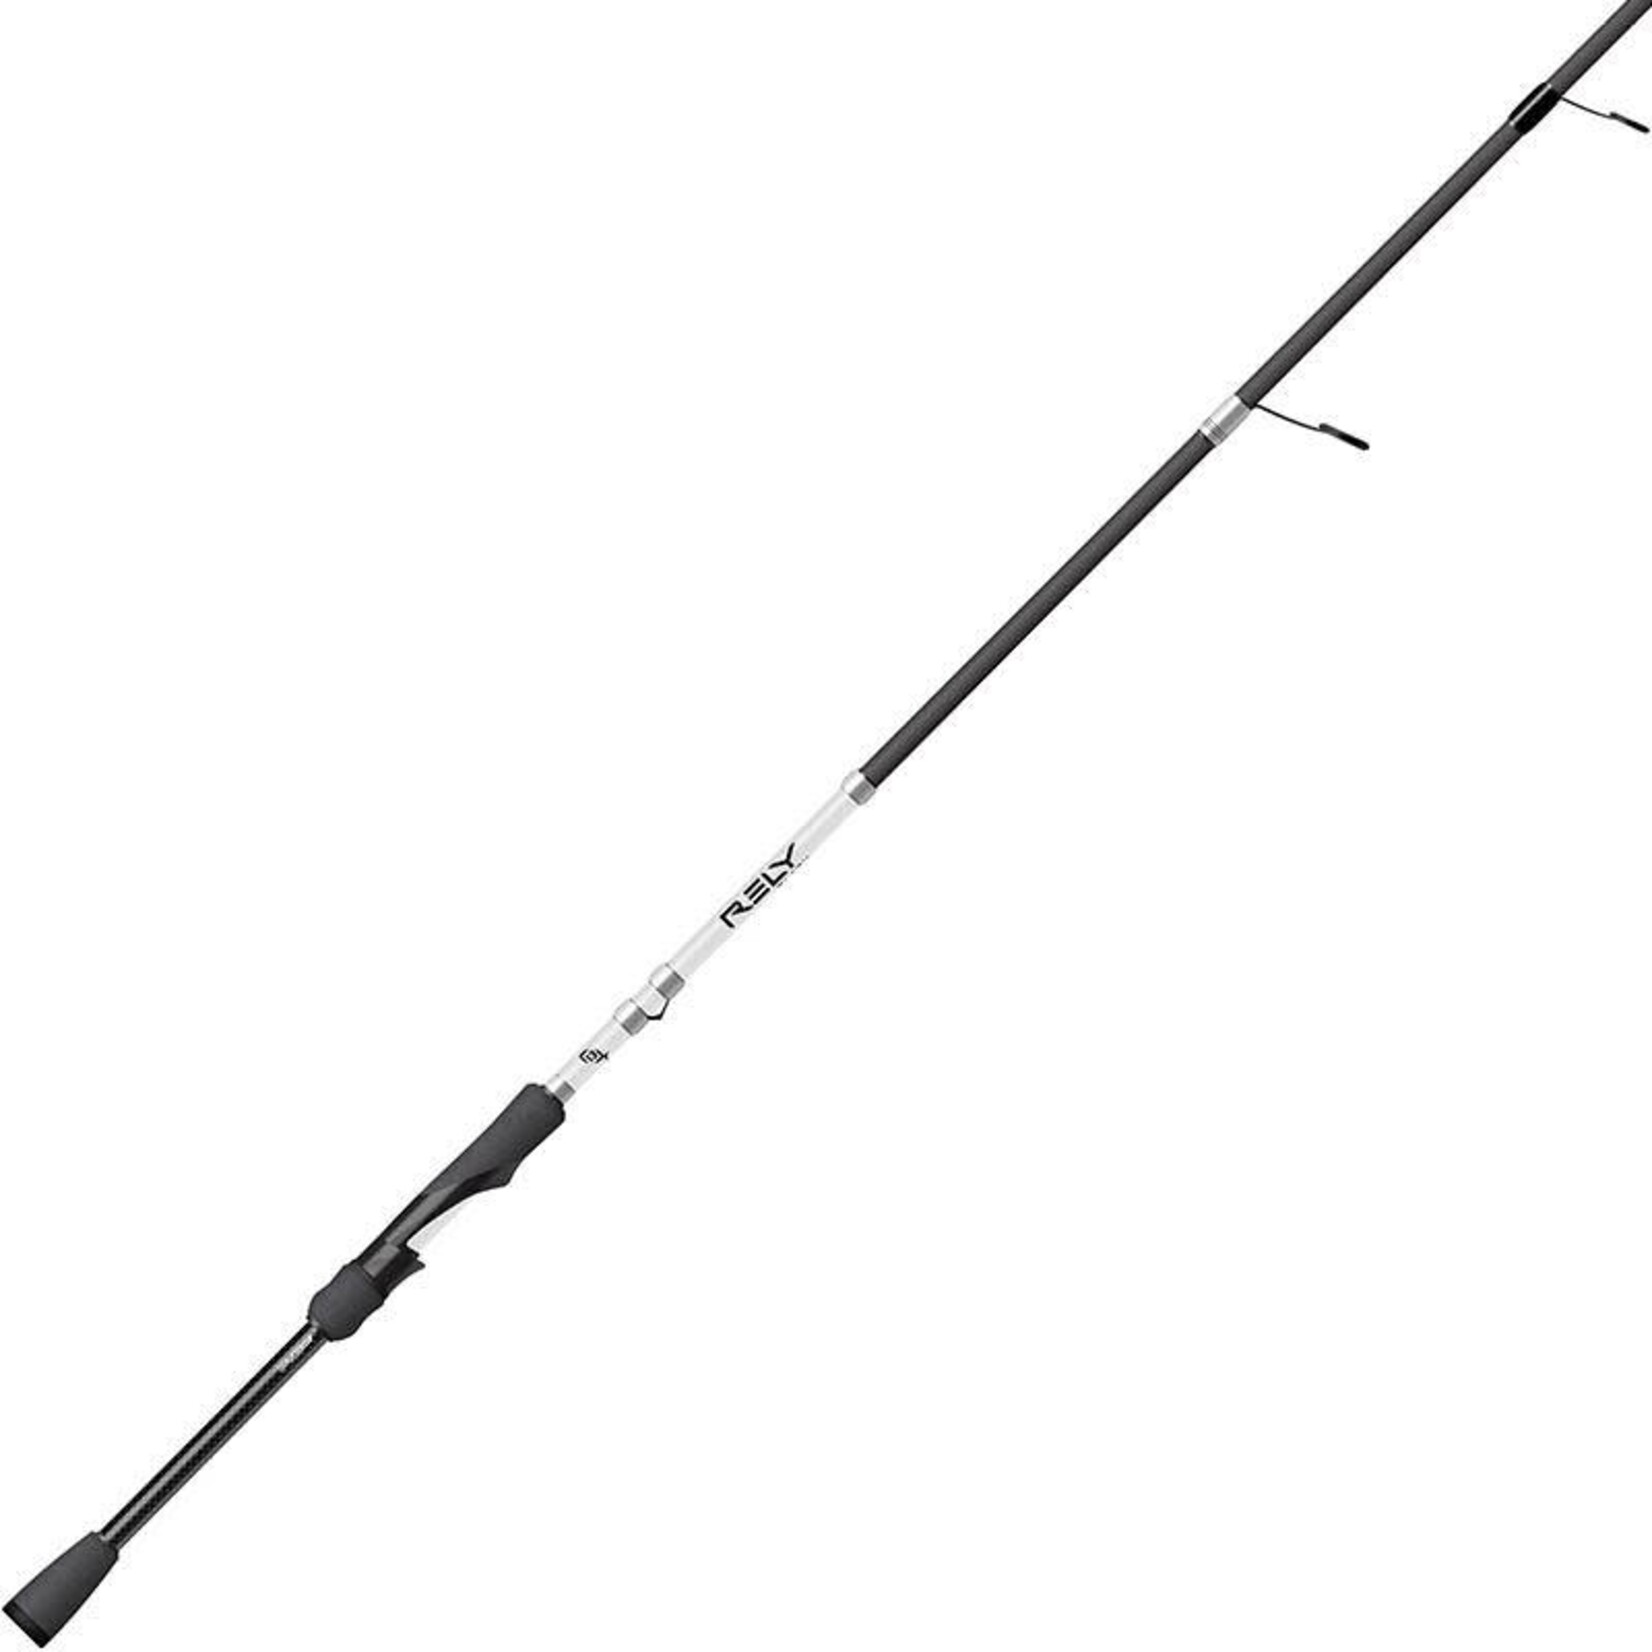 Canne Lancer Léger 13 Fishing Rely Black 9' Medium Heavy